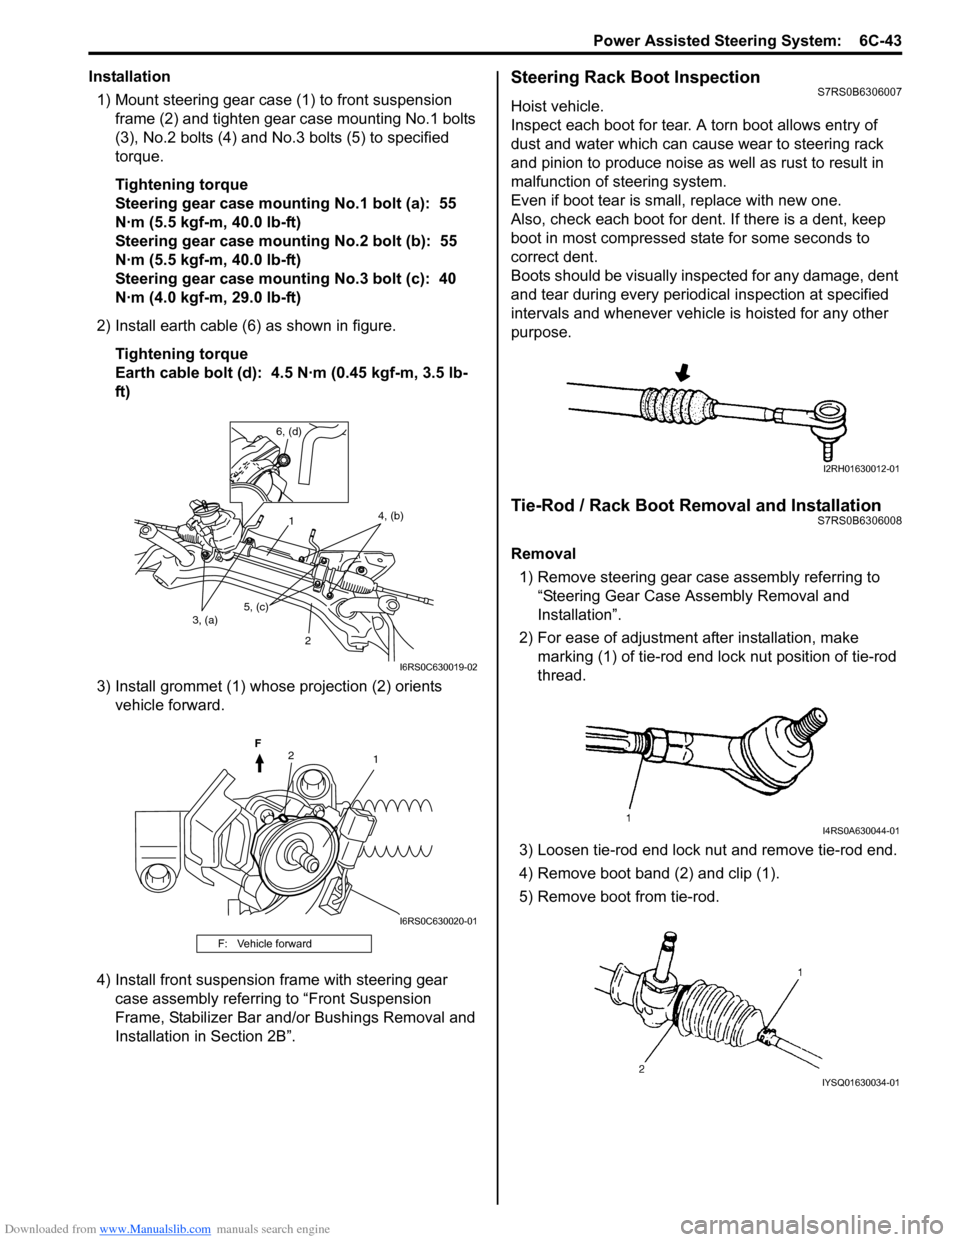 SUZUKI SWIFT 2006 2.G Service Workshop Manual Downloaded from www.Manualslib.com manuals search engine Power Assisted Steering System:  6C-43
Installation1) Mount steering gear case (1) to front suspension  frame (2) and tighten gear case mountin